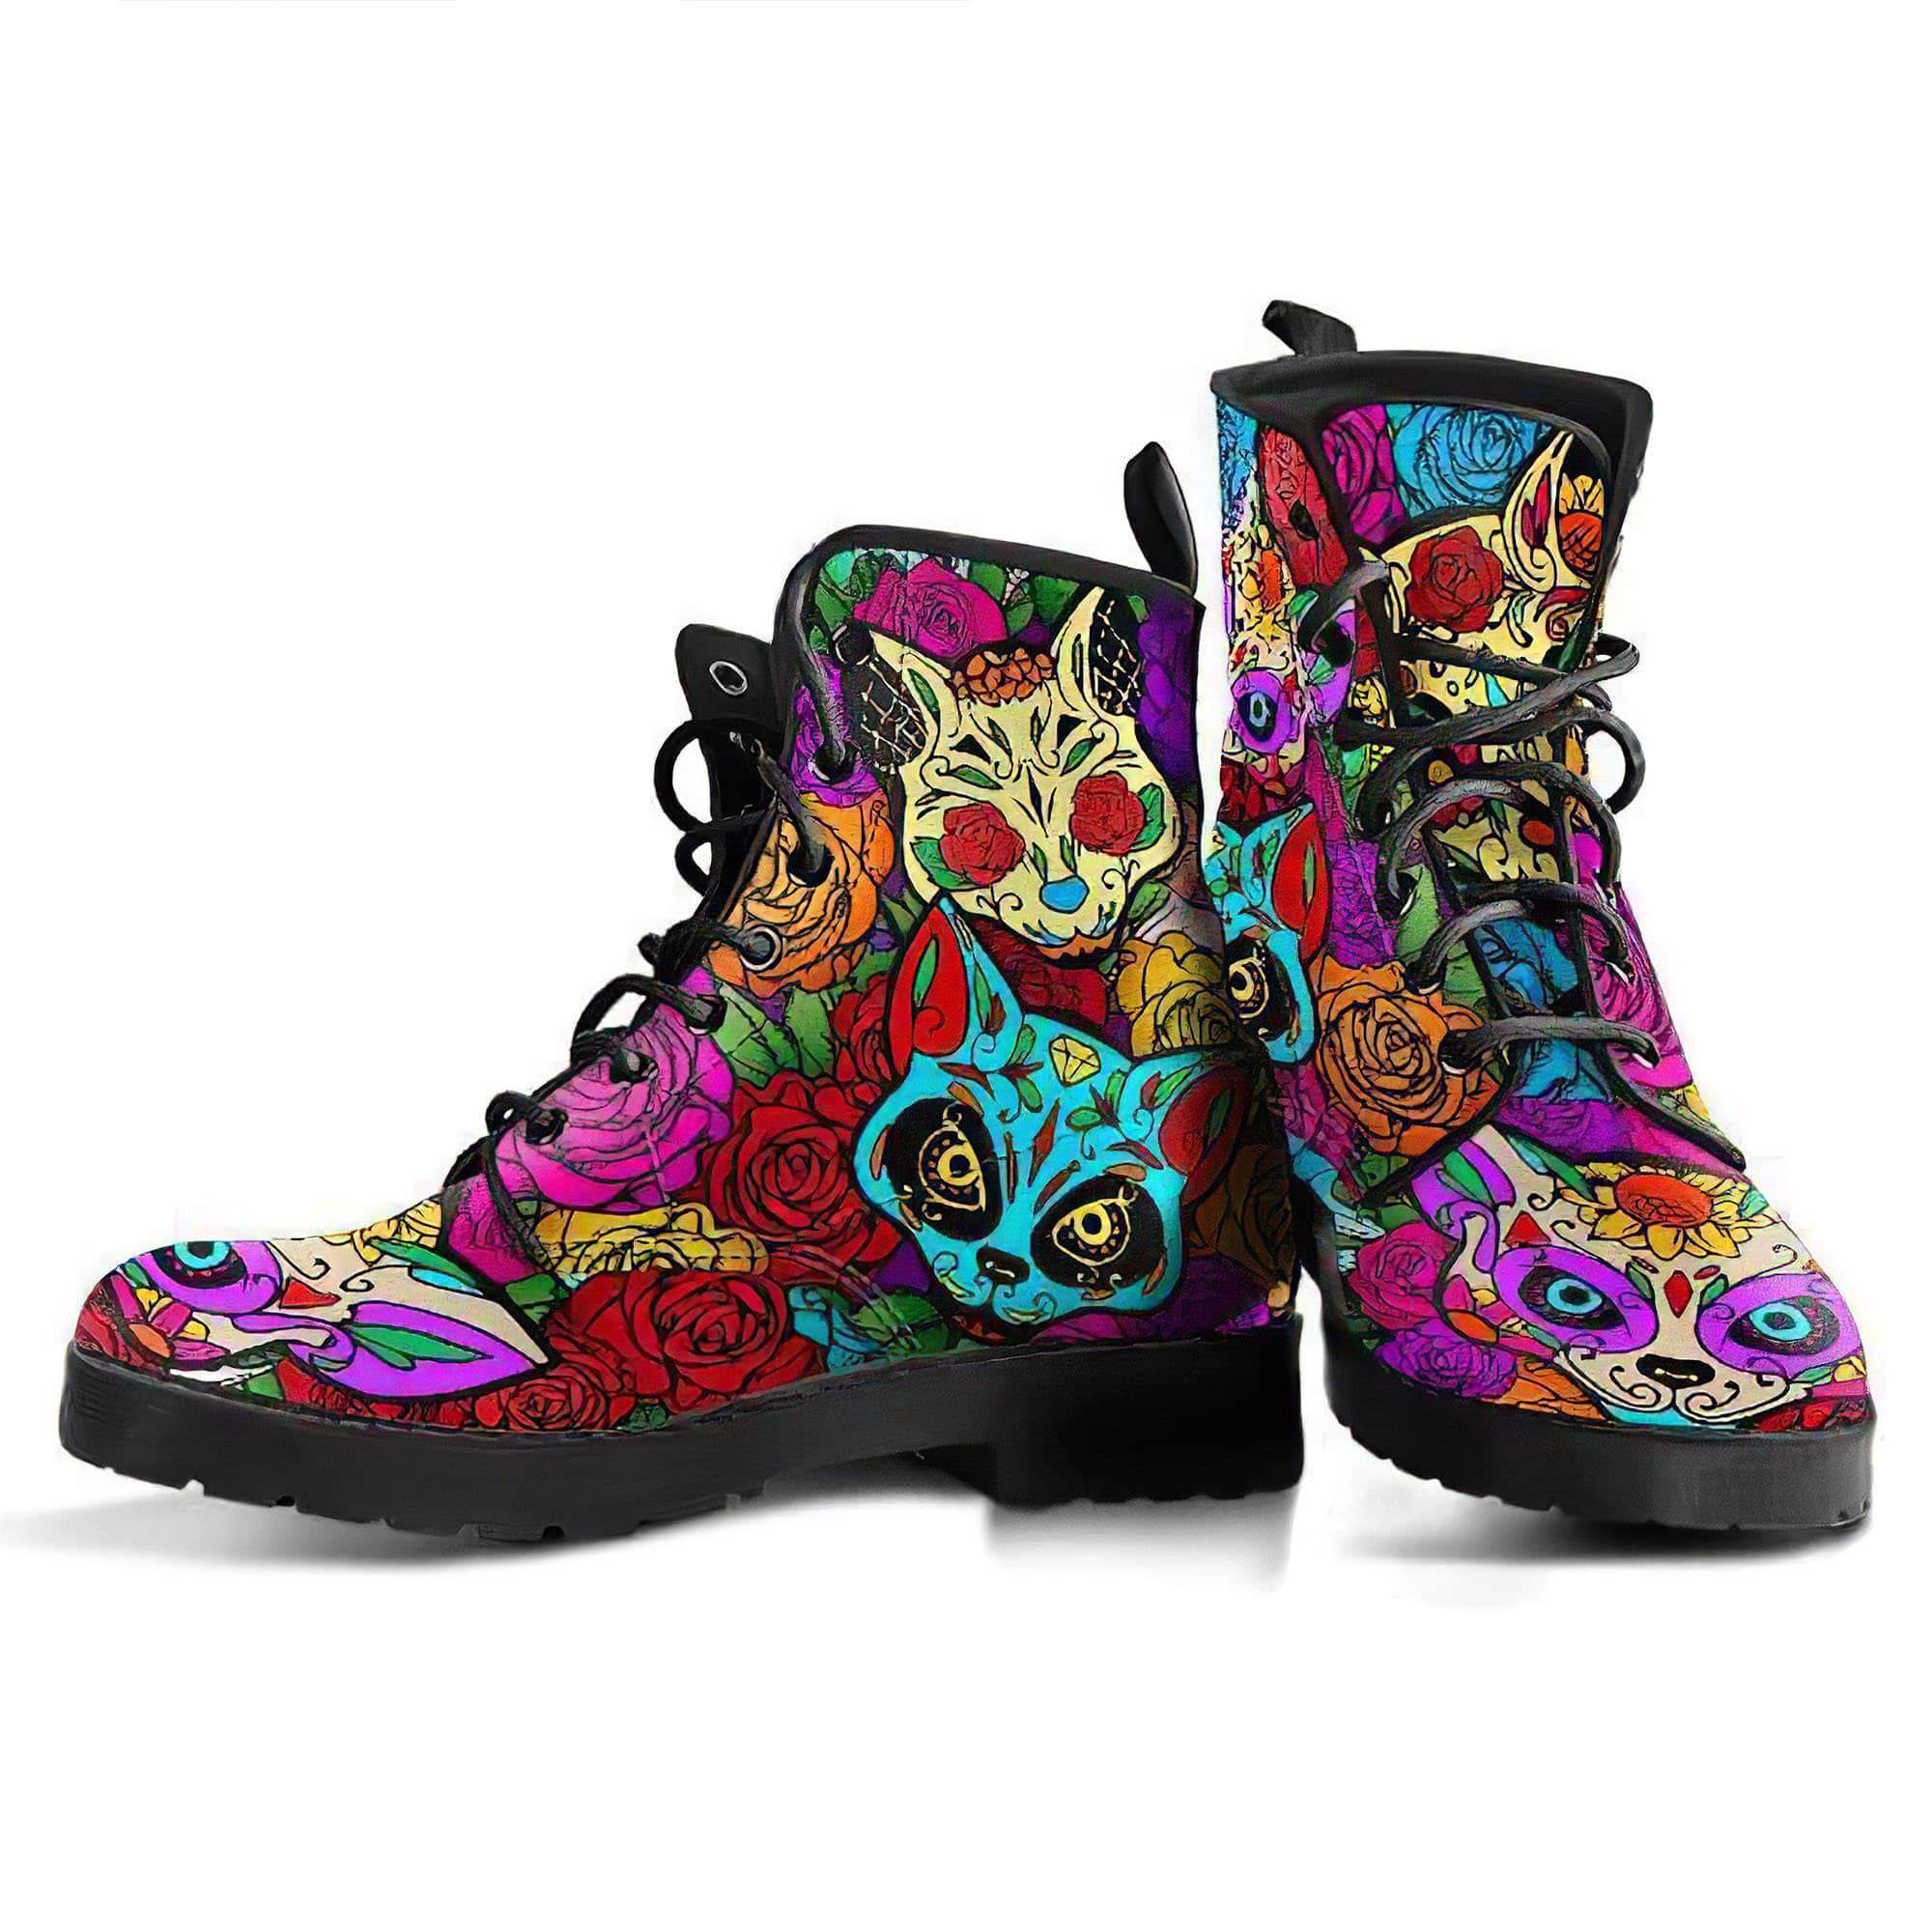 skull-cat-women-s-leather-boots-women-s-leather-boots-12051948699709.jpg